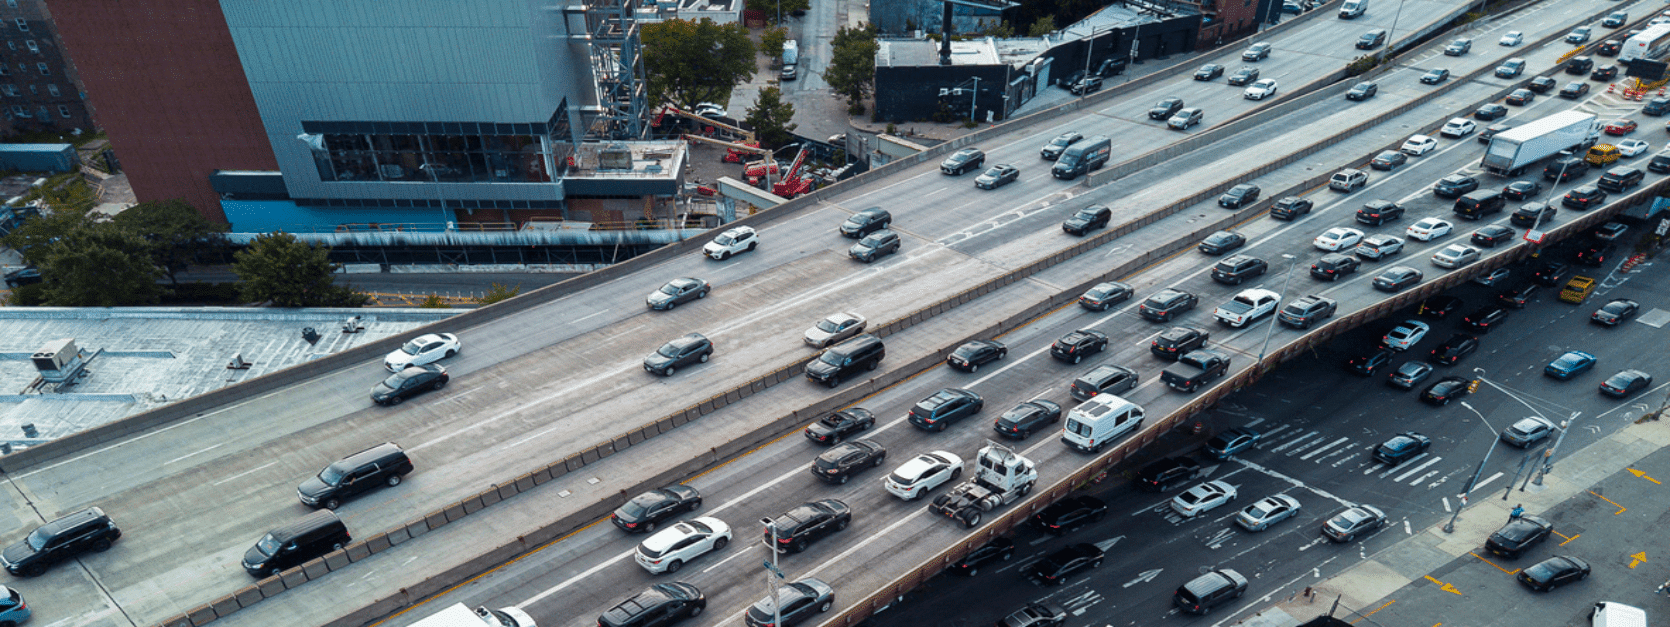 STEPS TO TAKE AFTER SUFFERING A CAR ACCIDENT IN CONGESTED BROOKLYN TRAFFIC